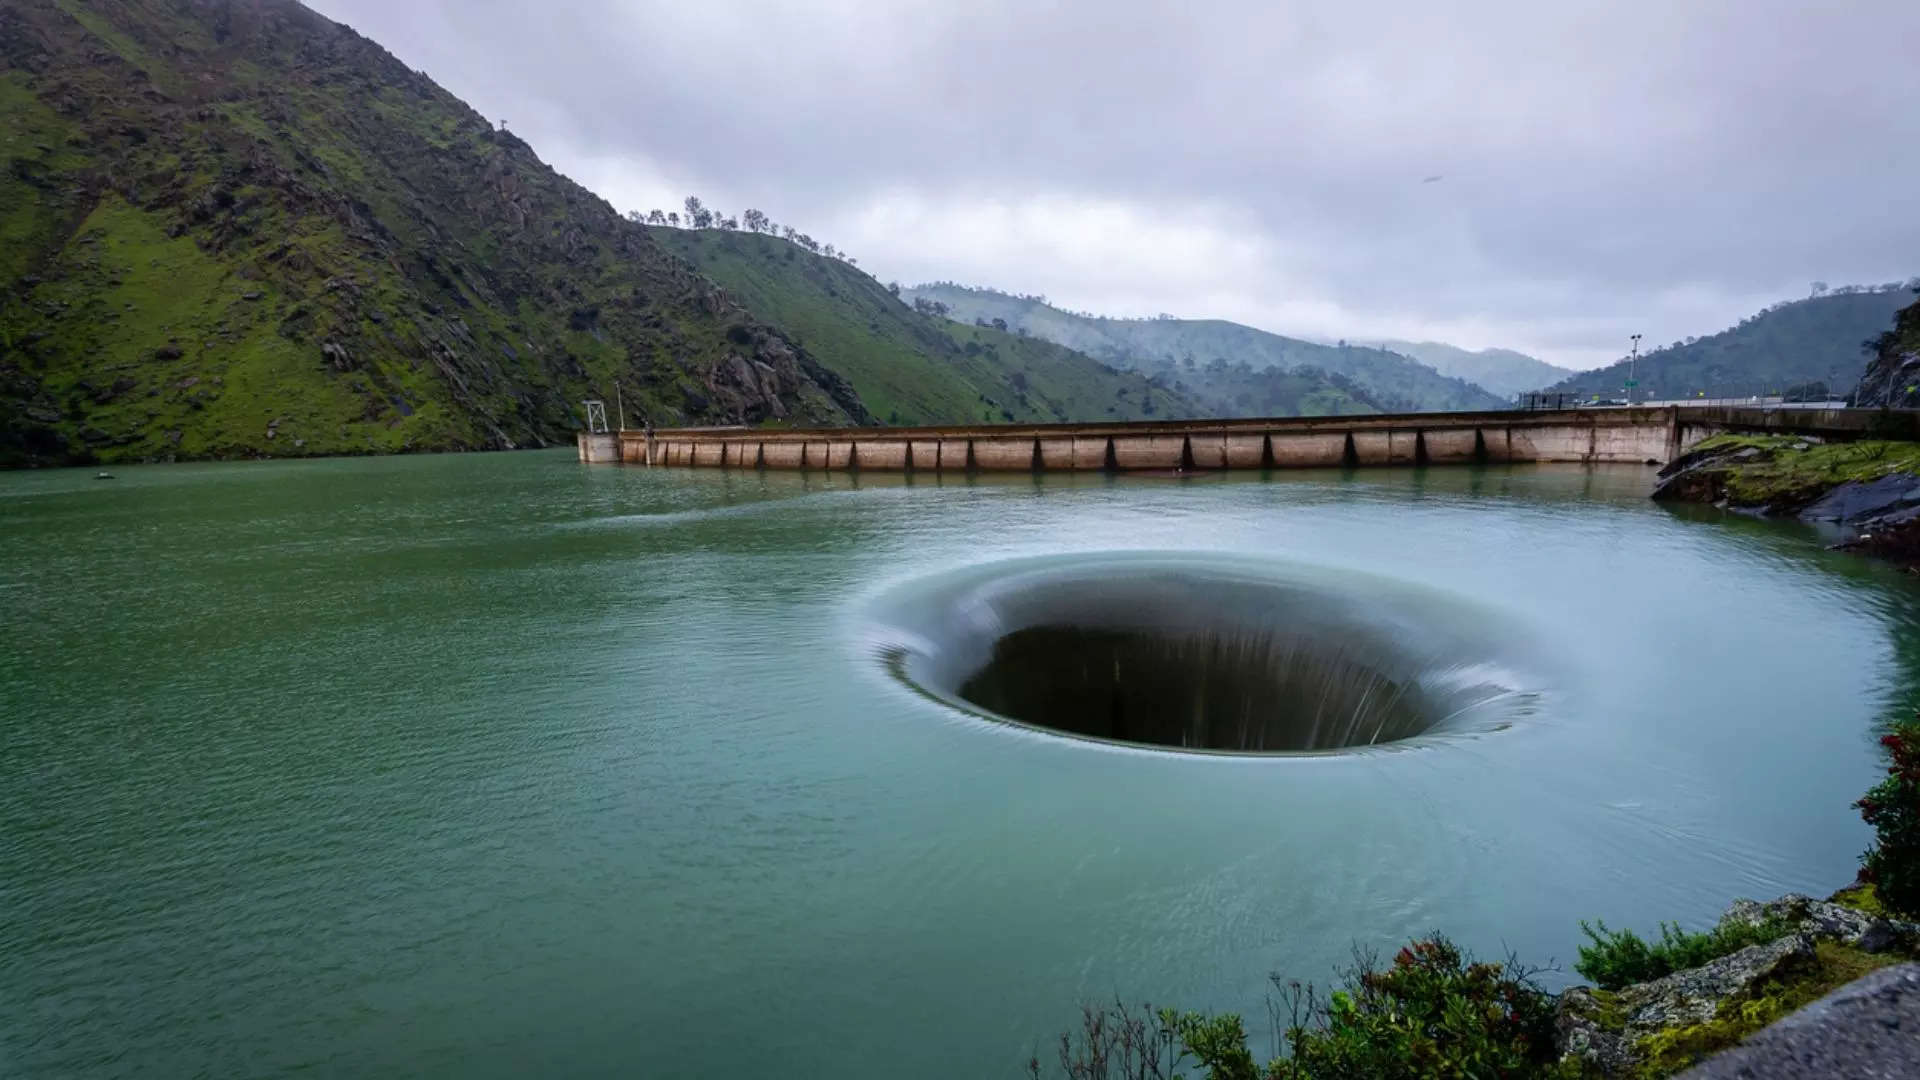 The 72-ft-wide and 245-ft-long spillway is fondly called by the locals as the Glory Hole 